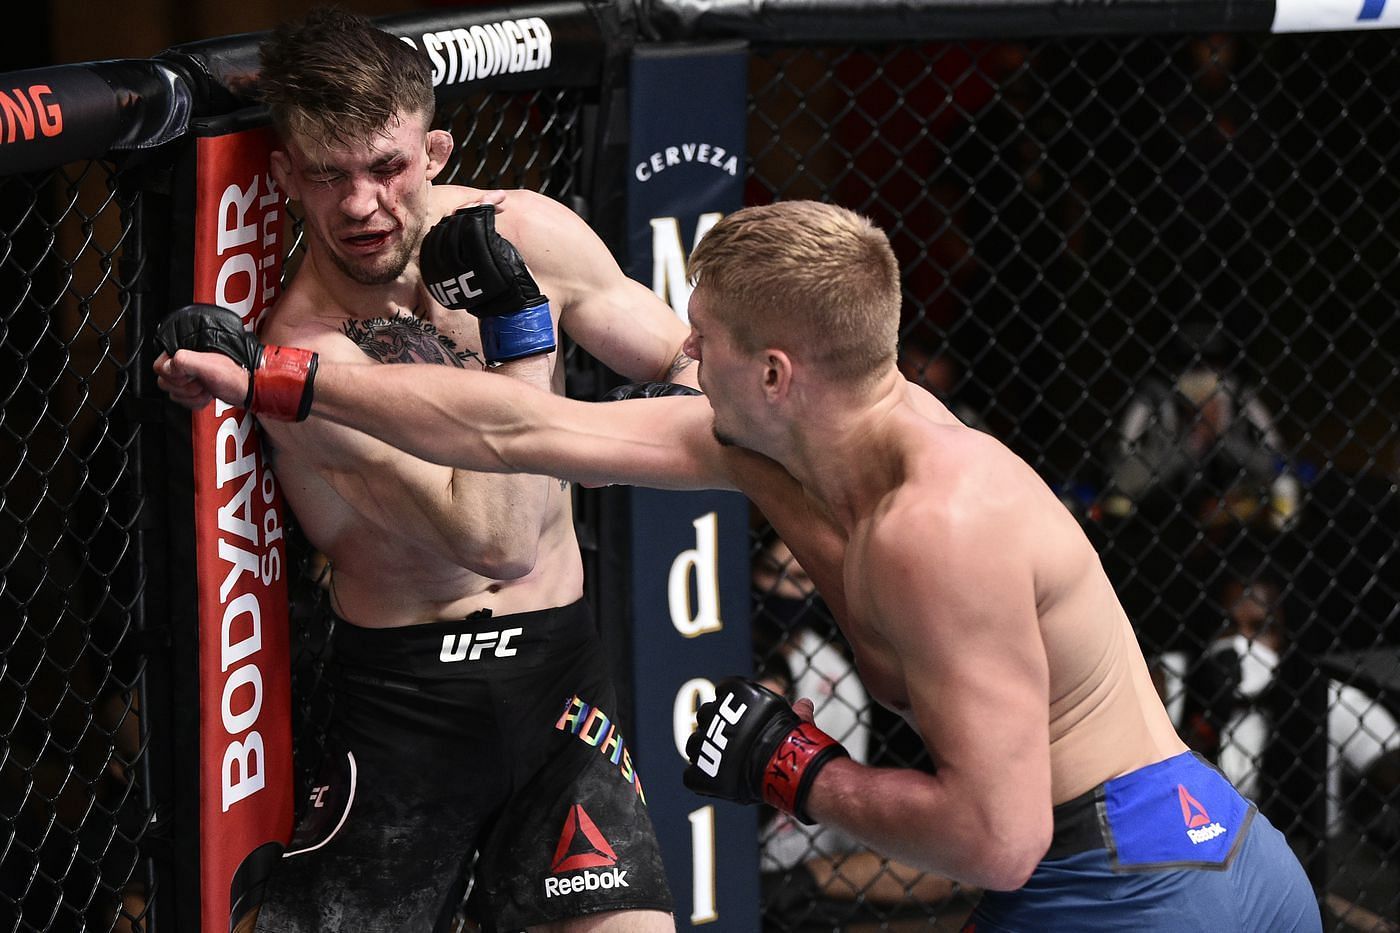 Max Rohskopf lasted just one fight in the octagon before his release from the promotion